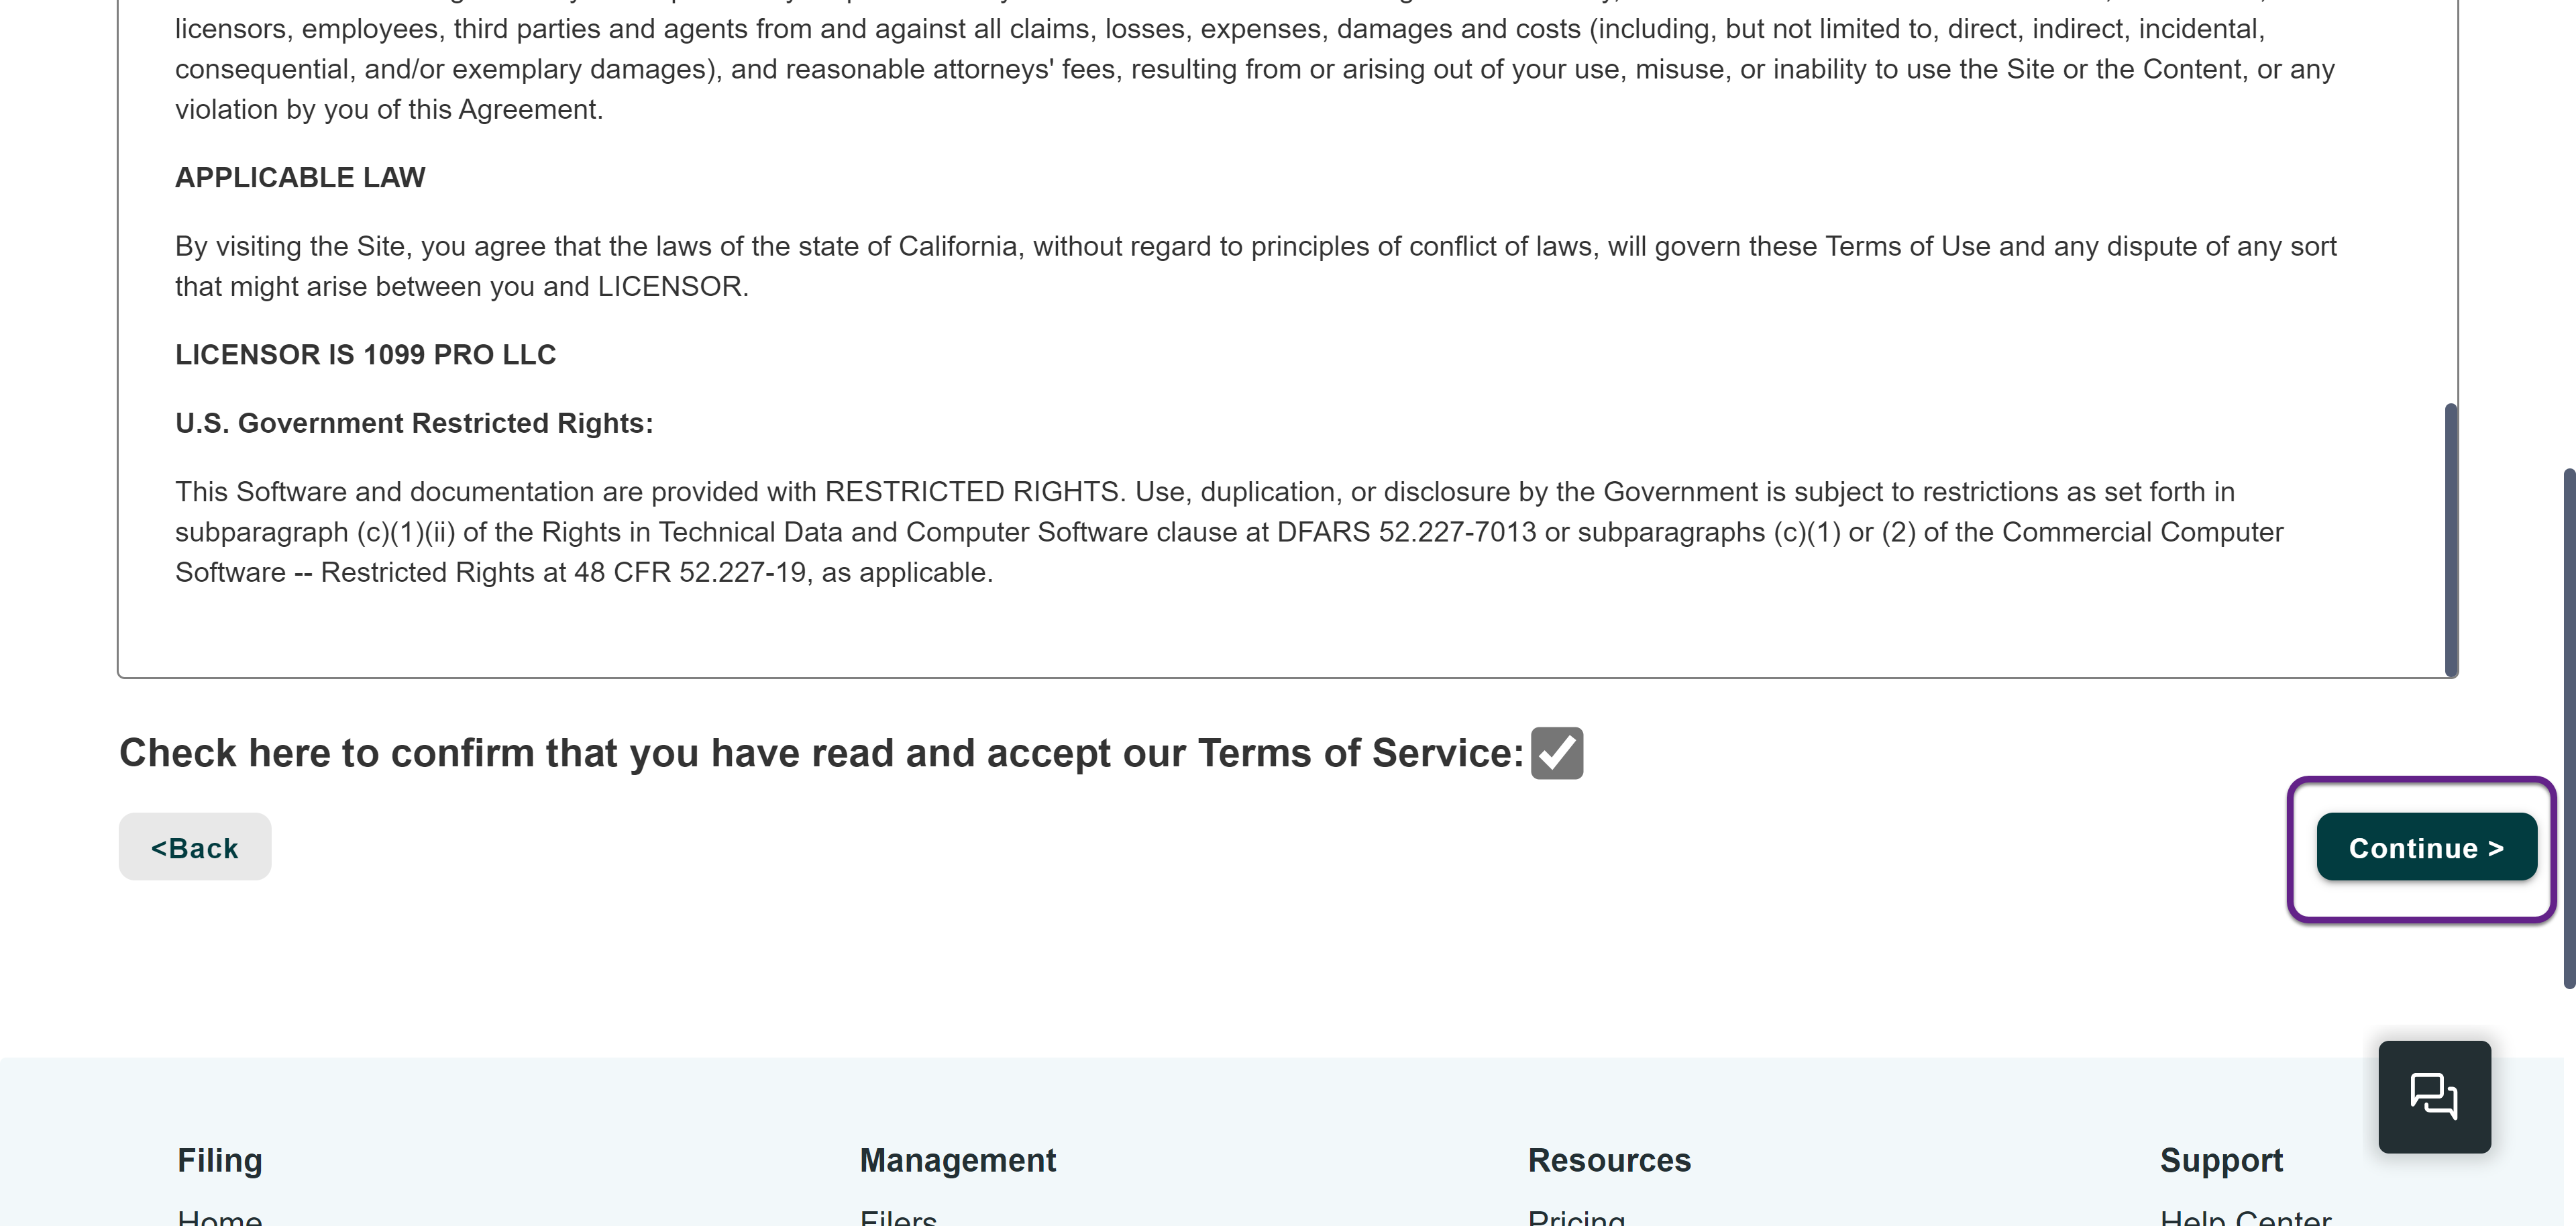 Image of the Terms of Service page with a callout on the Continue button.